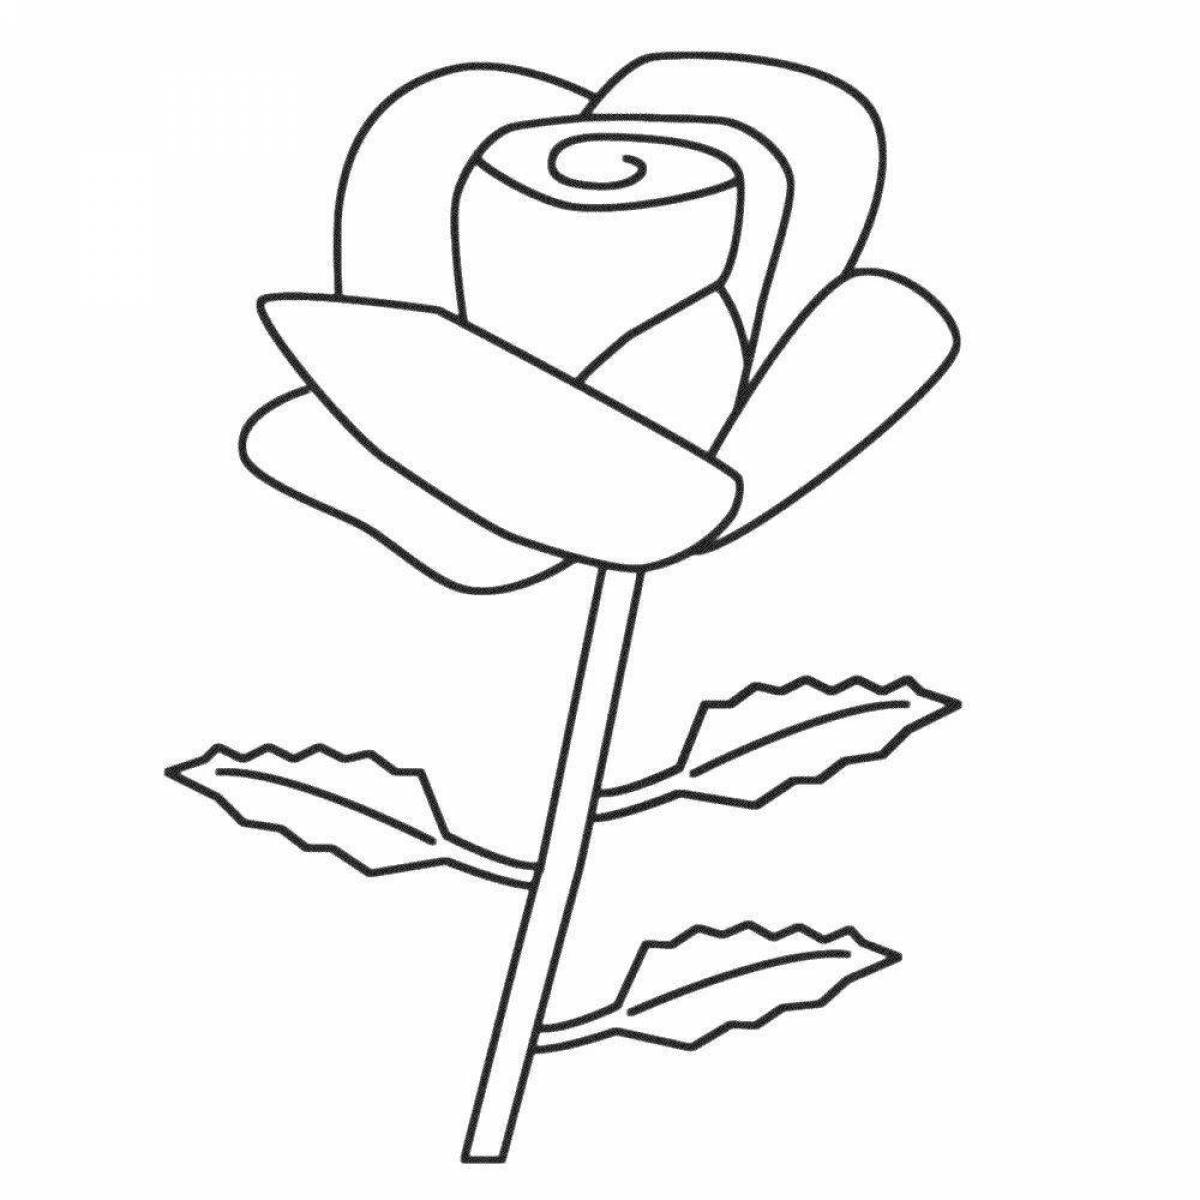 Awesome rose coloring page for girls